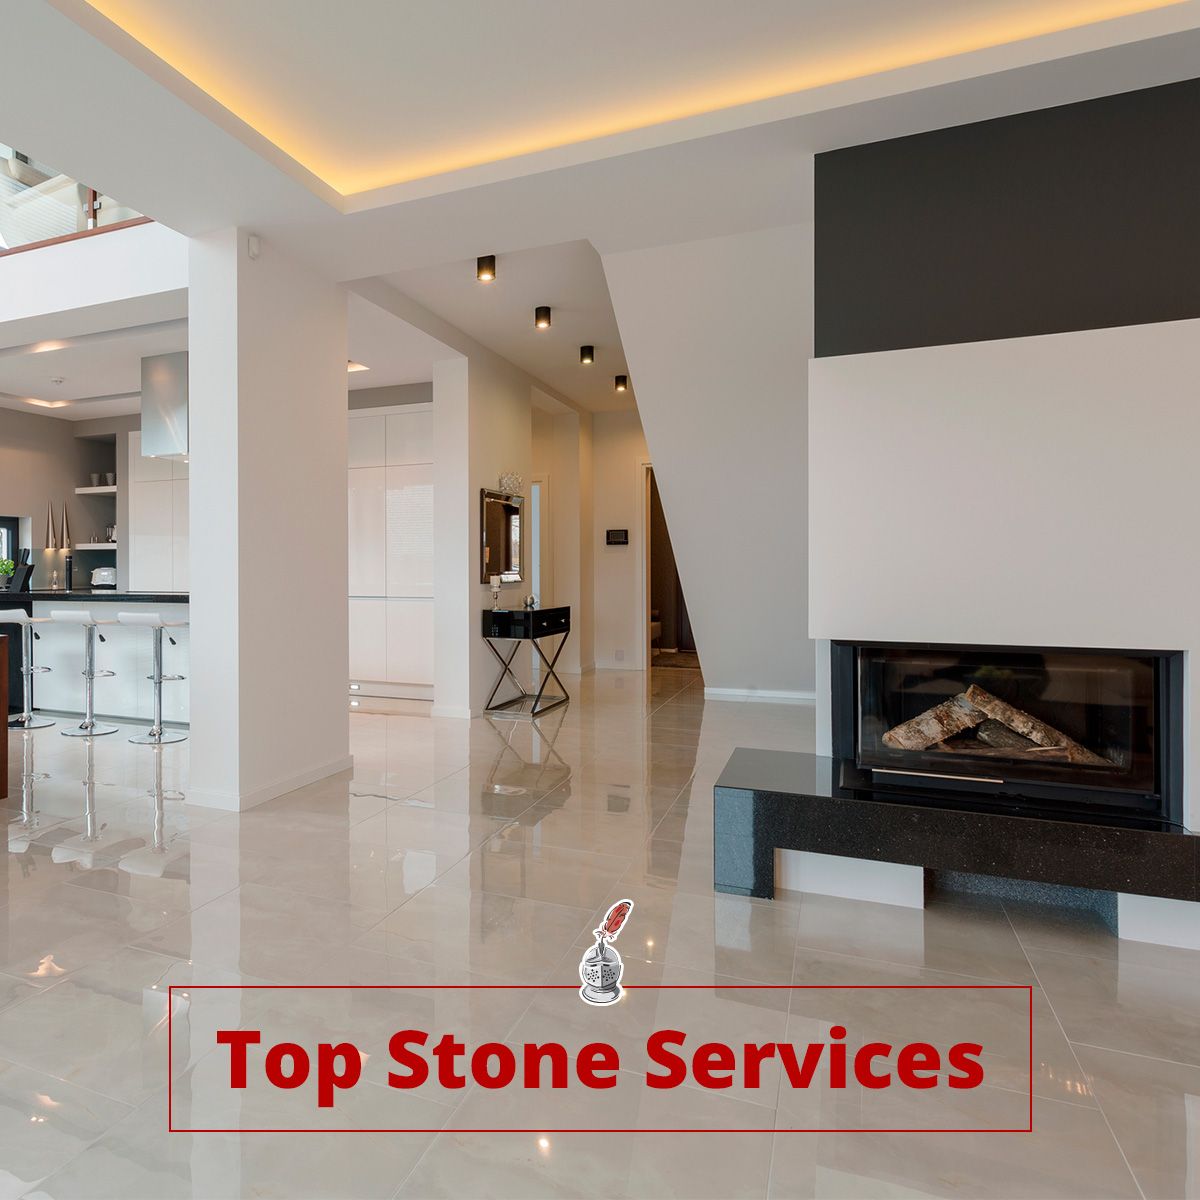 Top Stone Services